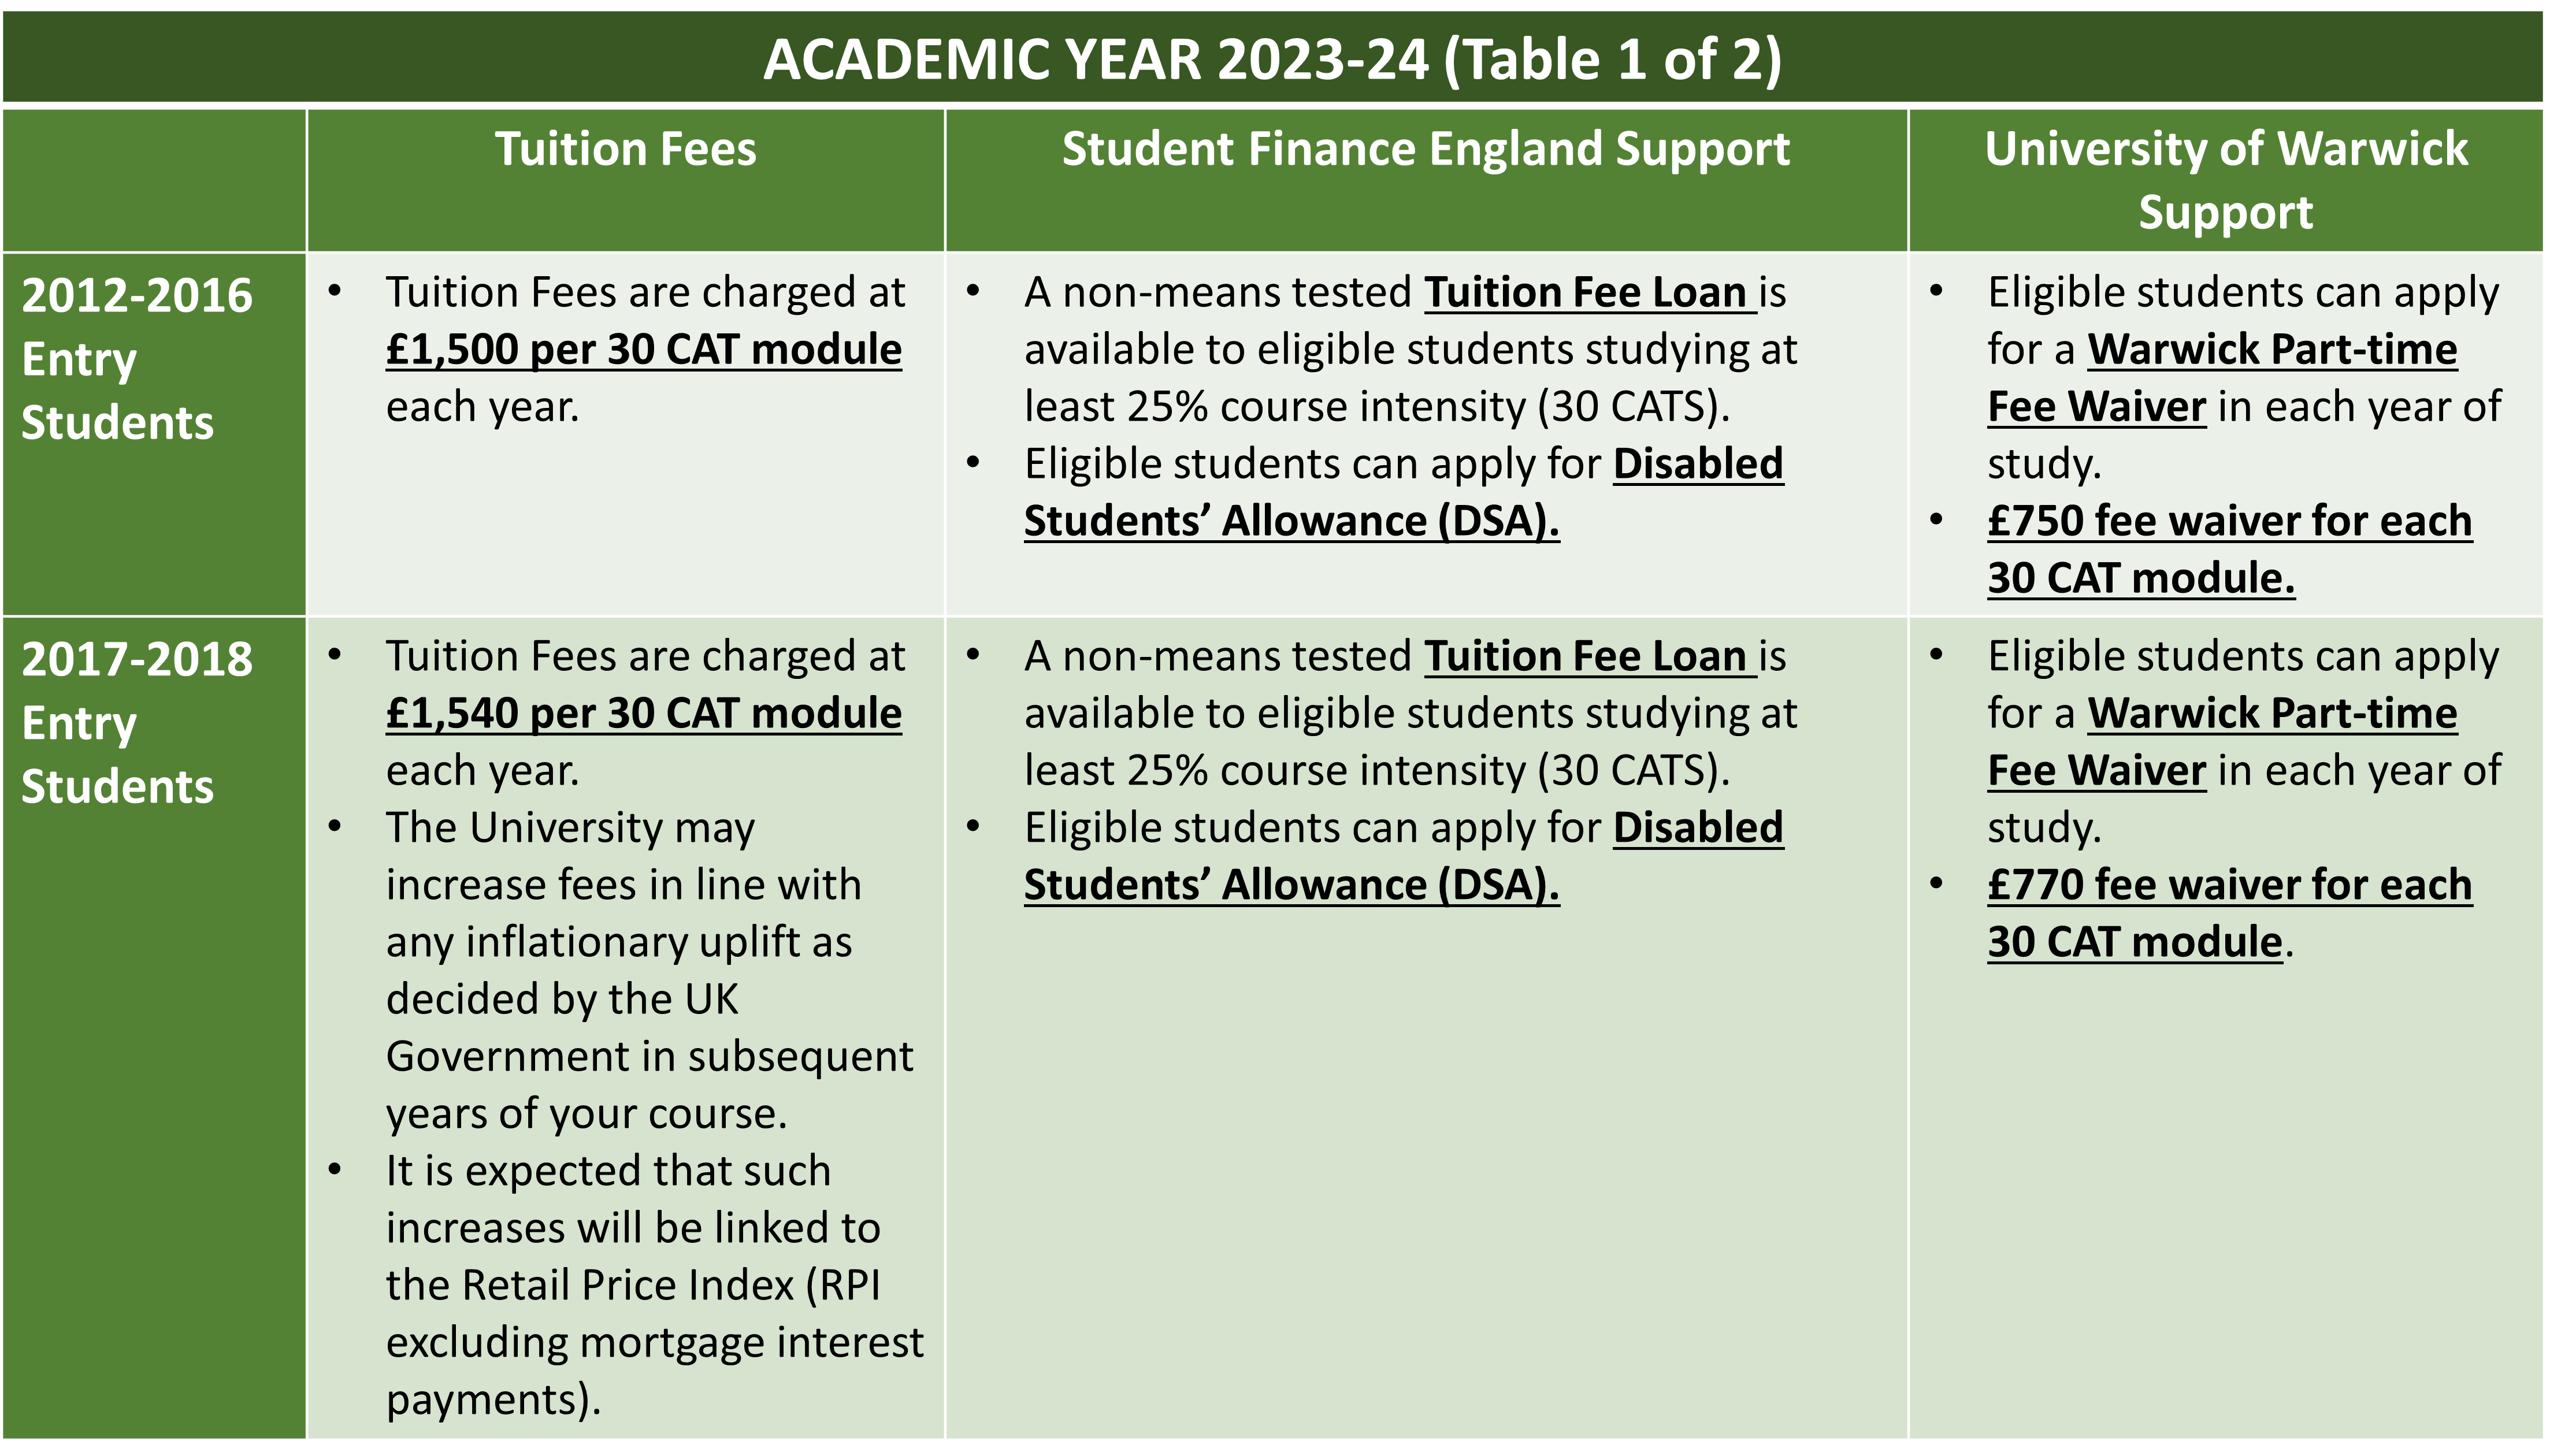 Table of information demonstrating the cost of tuition fees, support from Student Finance England and support from University of Warwick in the academic year 2023-24, based on year of entry.